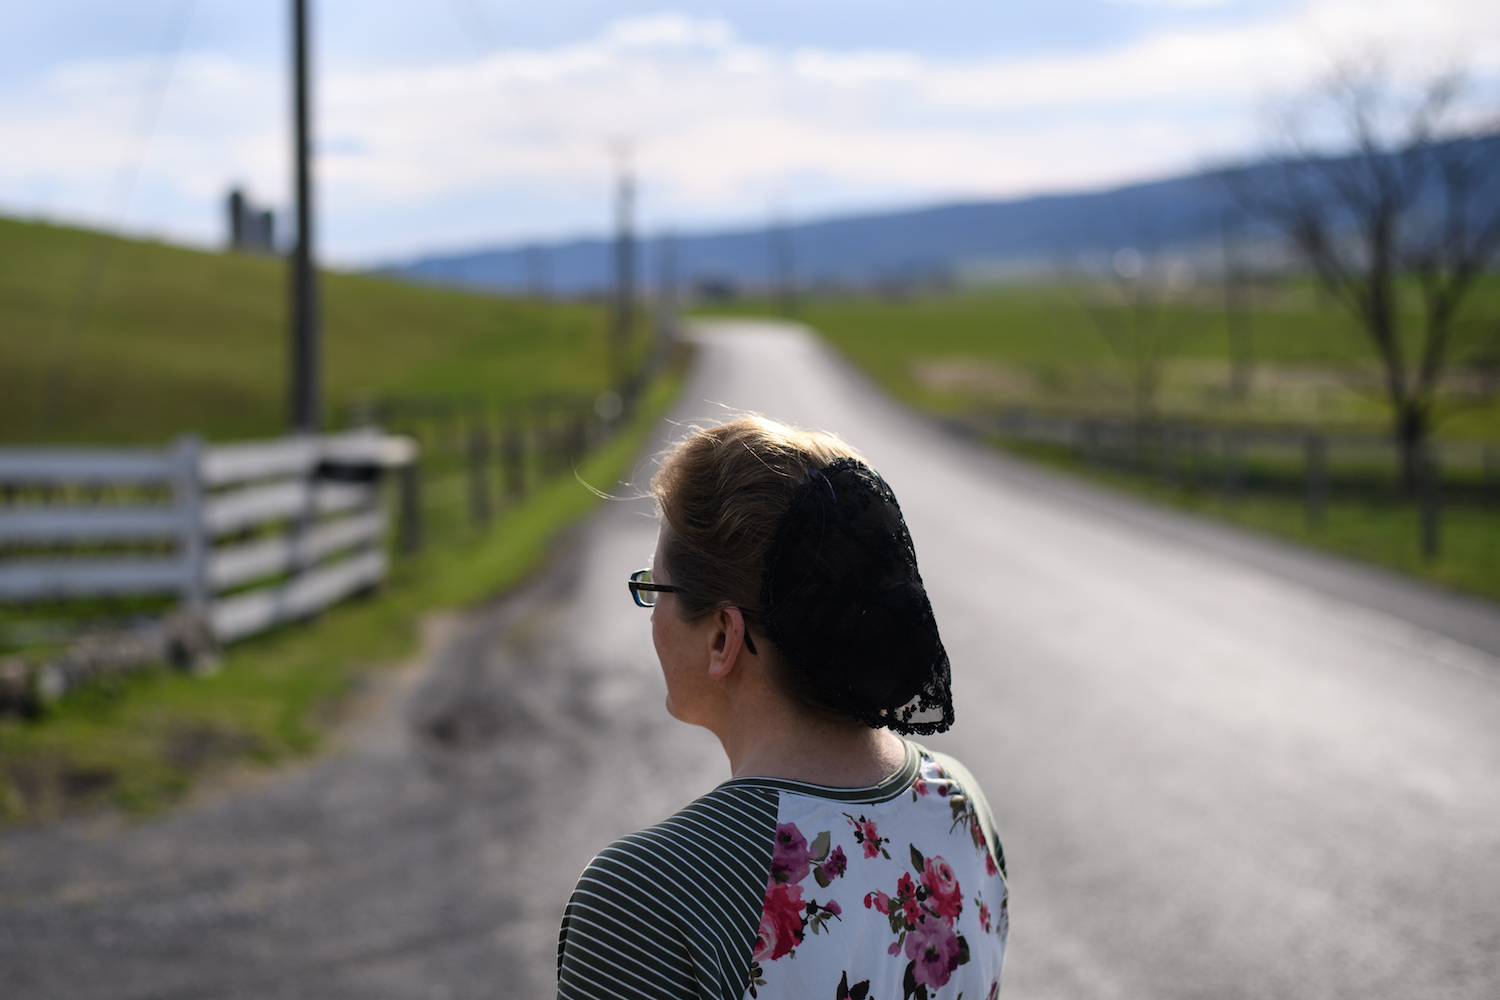 "Let's go back to 1994, to the devastation I felt when I walked in on my husband abusing my baby girl. My tiny, helpless 1-month-old baby. He apologized and promised it would never happen again, and I believed him." | Kay, a former conservative Mennonite woman, in Central Pennsylvania. (Stephanie Strasburg/Post-Gazette)